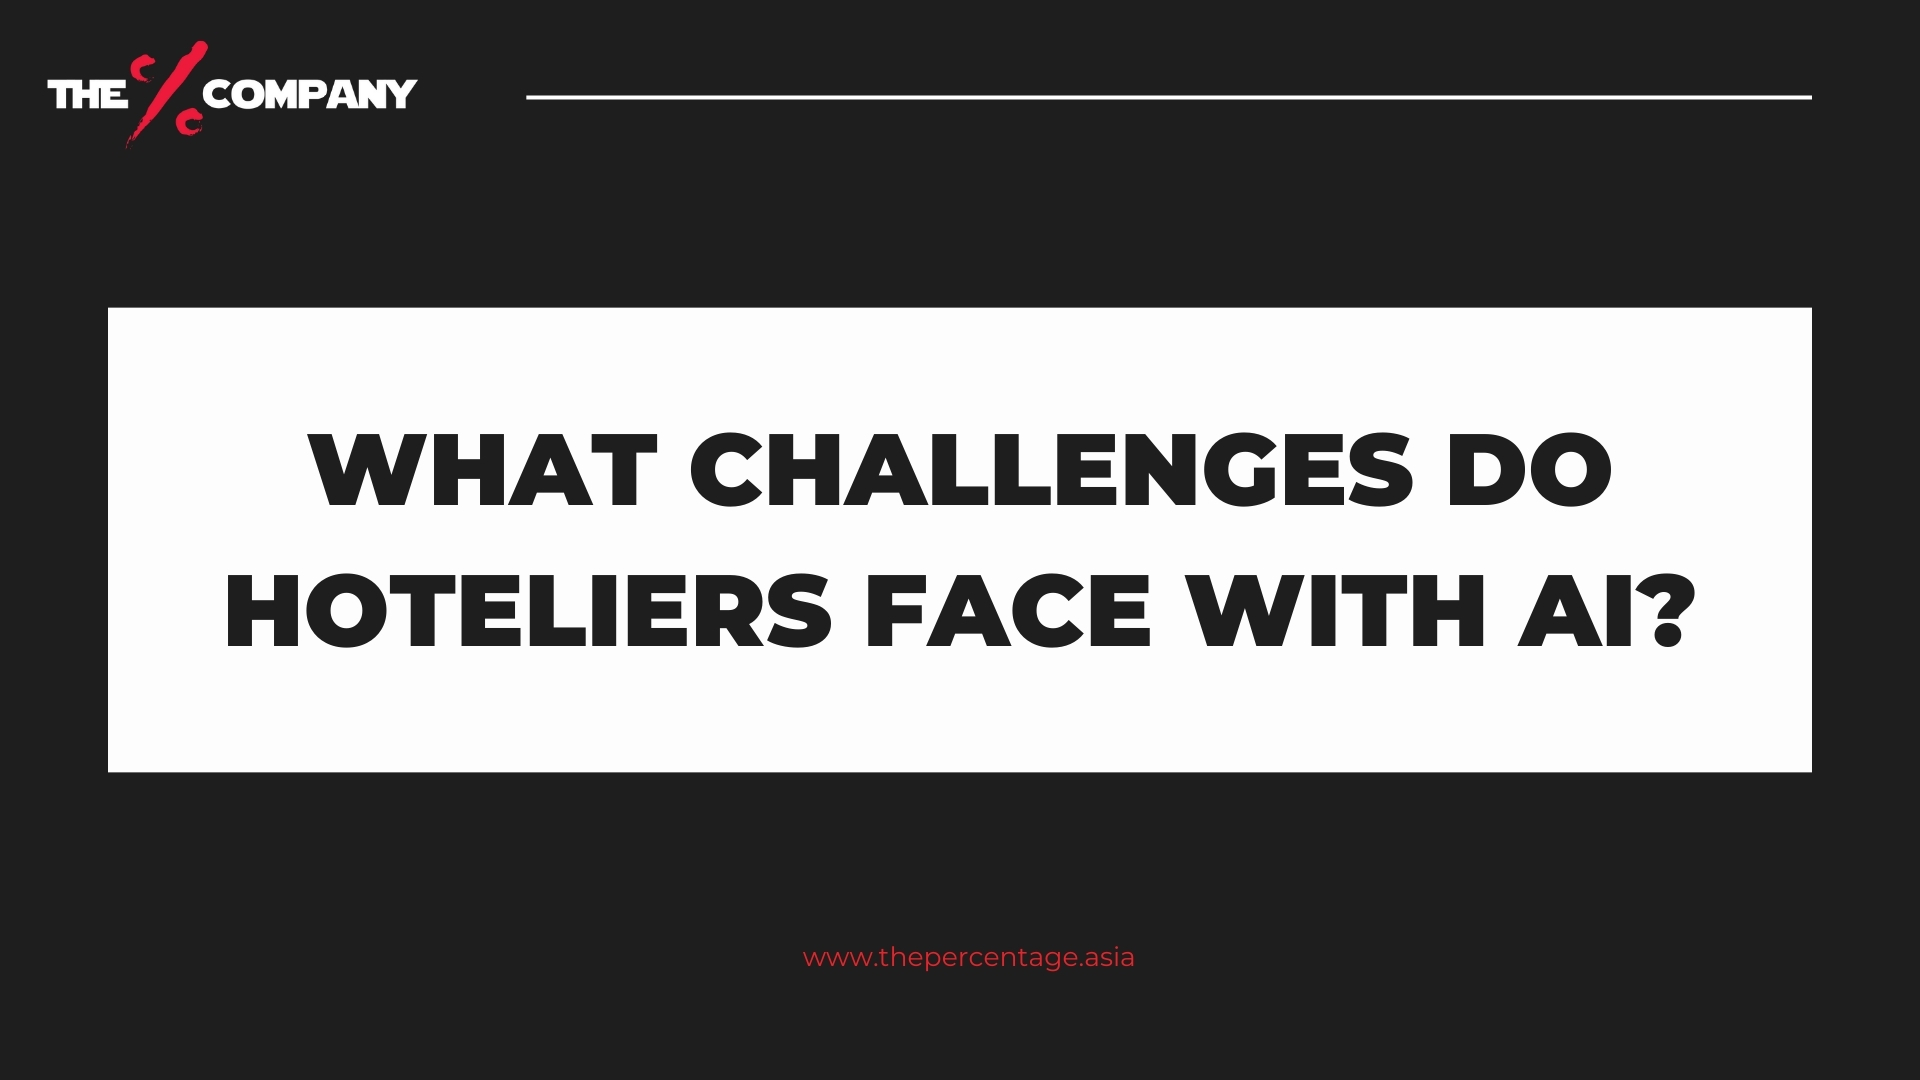 What challenge do hoteliers face with AI